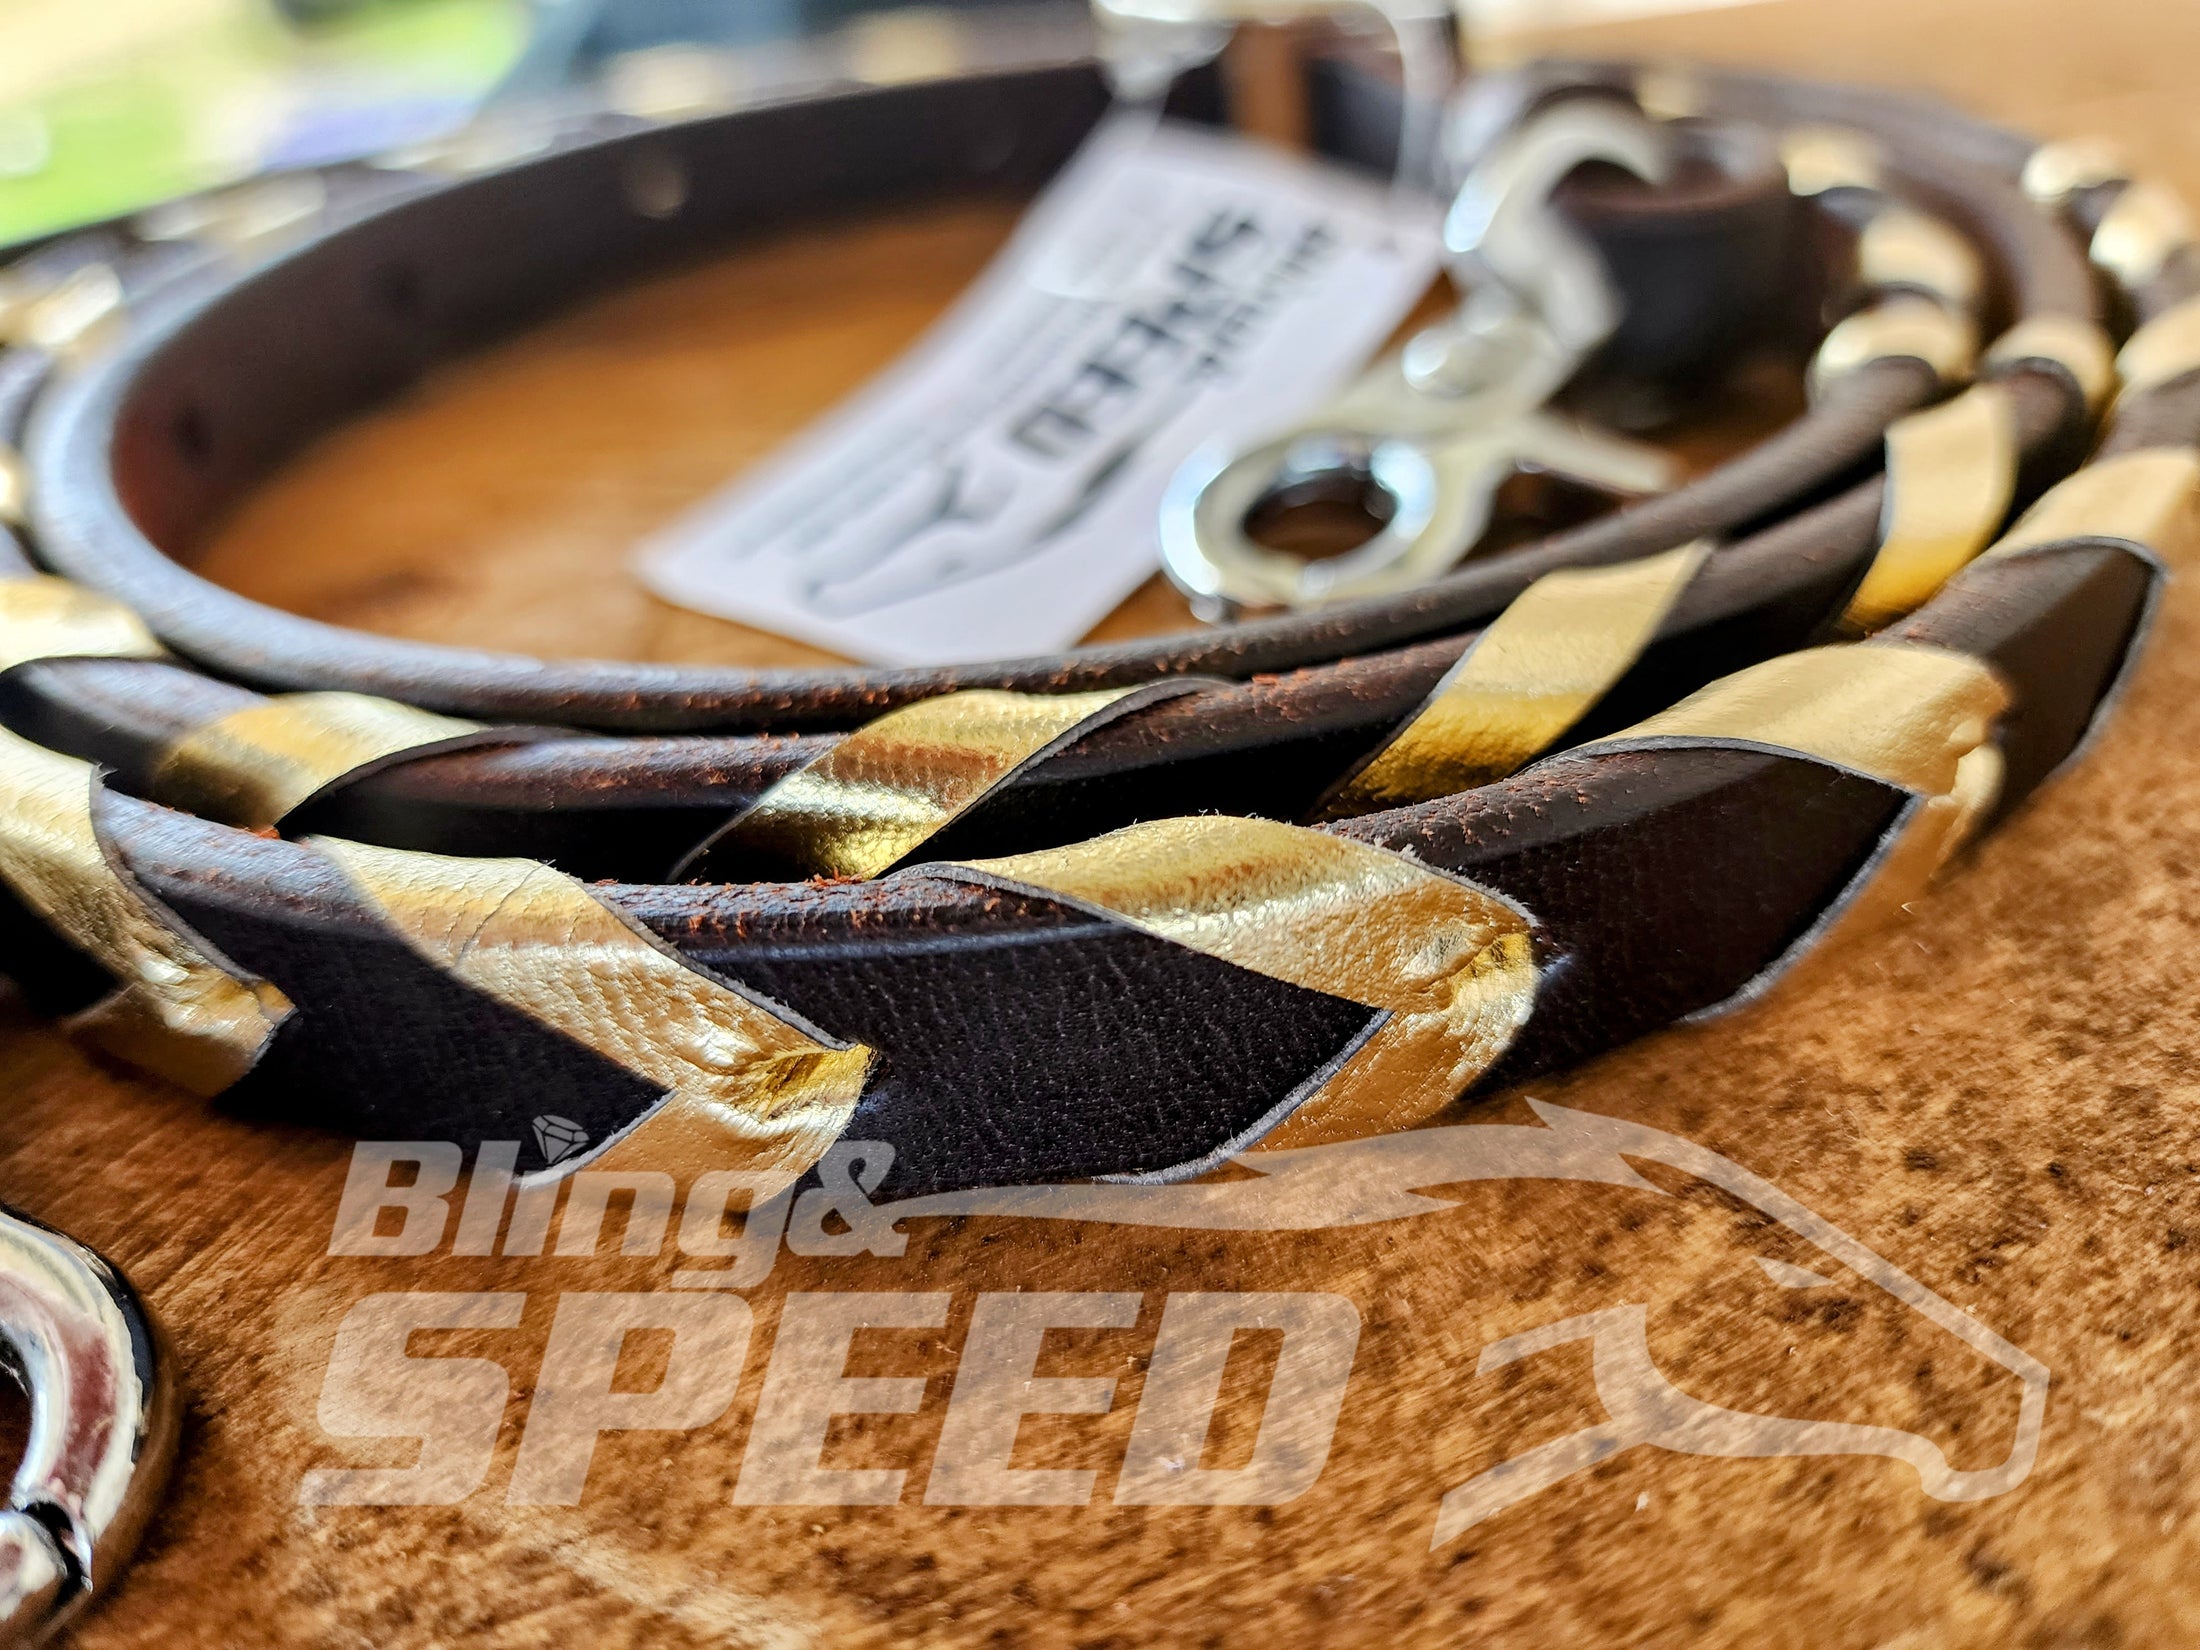 Bling and Speed Gold Laced Barrel Reins (7873220575470)